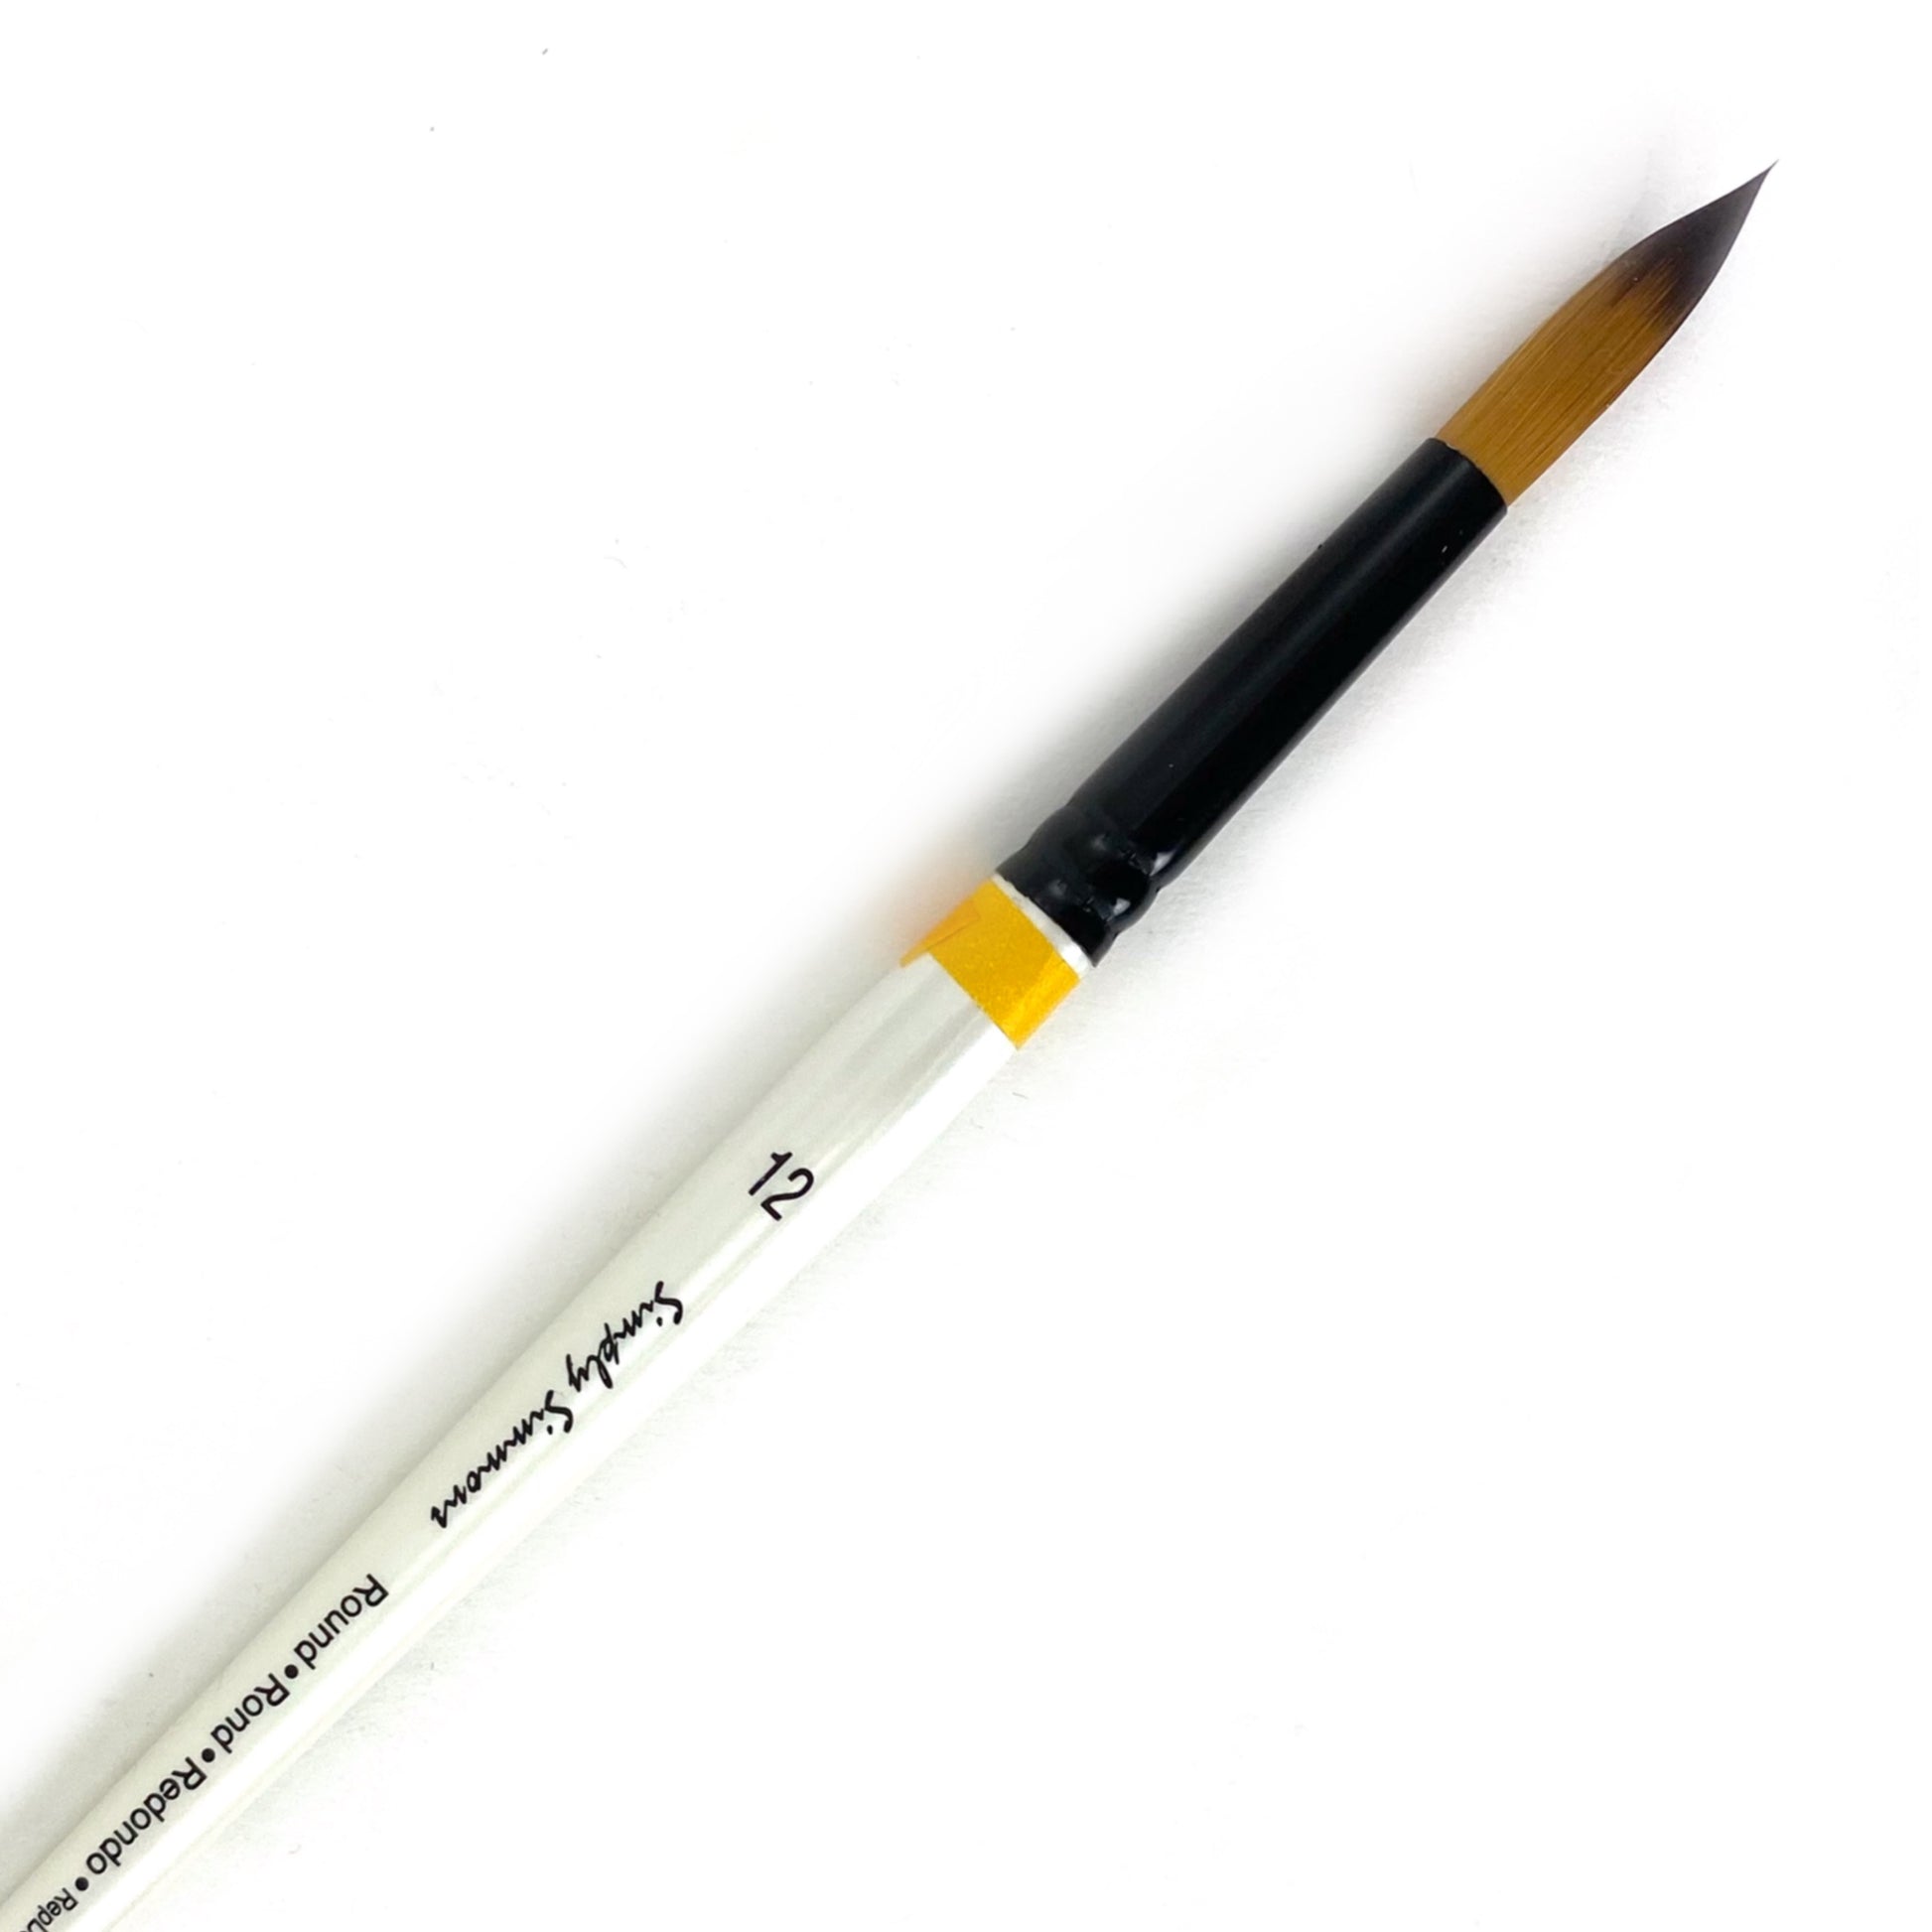 Simply Simmons All-Media Brush - Short Handle - Round / #12 by Robert Simmons - K. A. Artist Shop